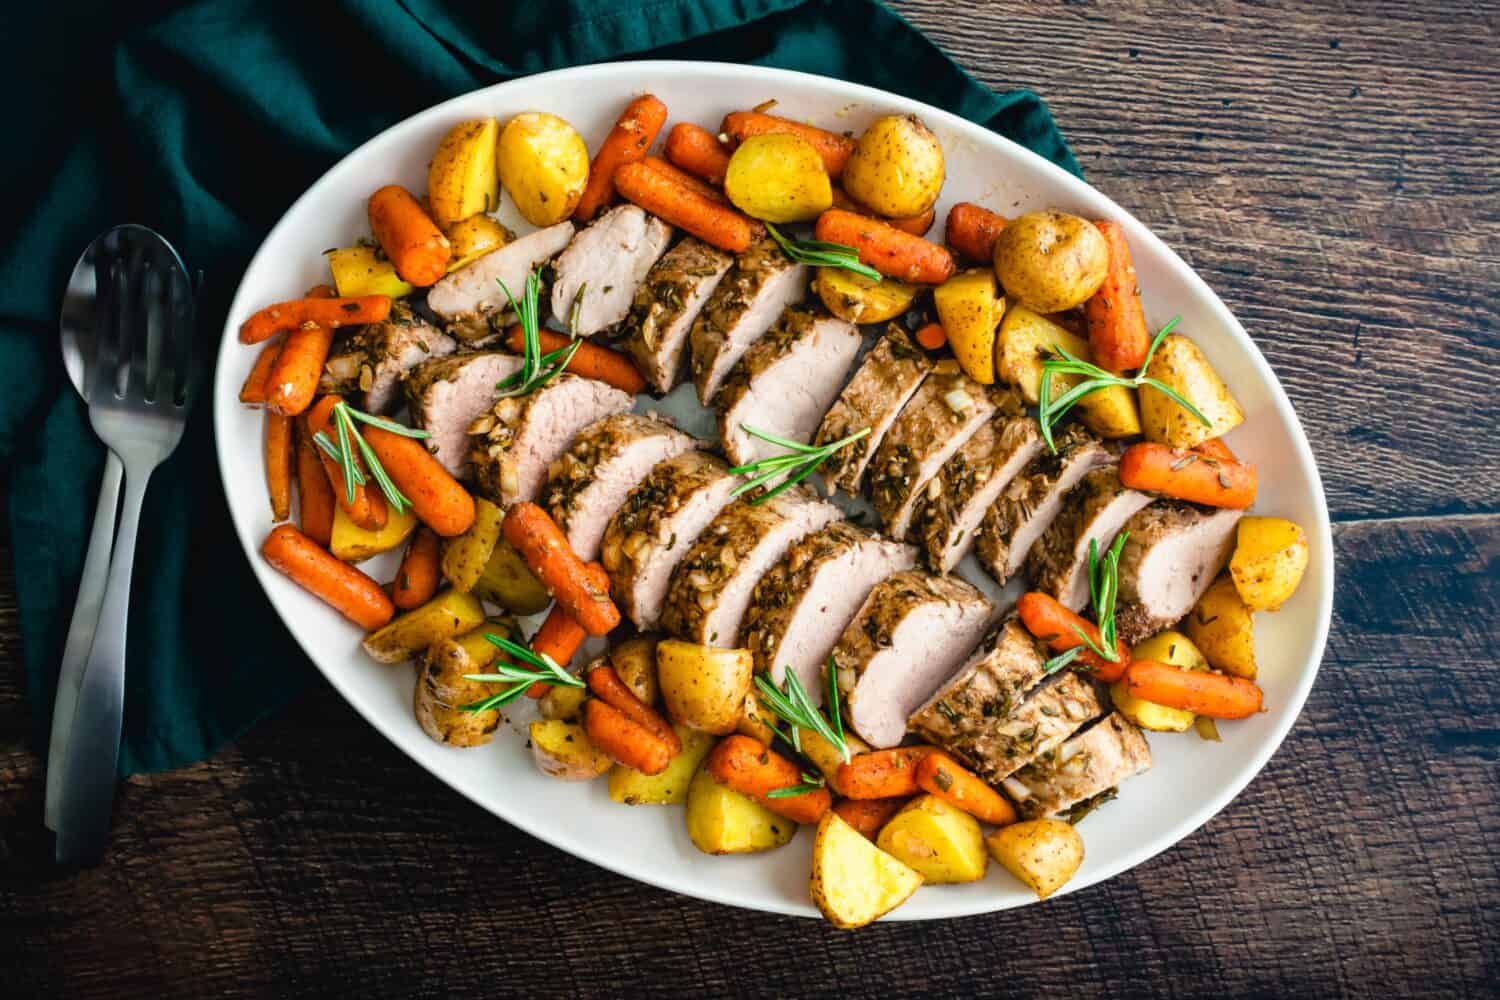 Roast Pork Tenderloin with Potatoes and Baby Carrots: Sliced pork medallions surrounded with vegetables on a platter